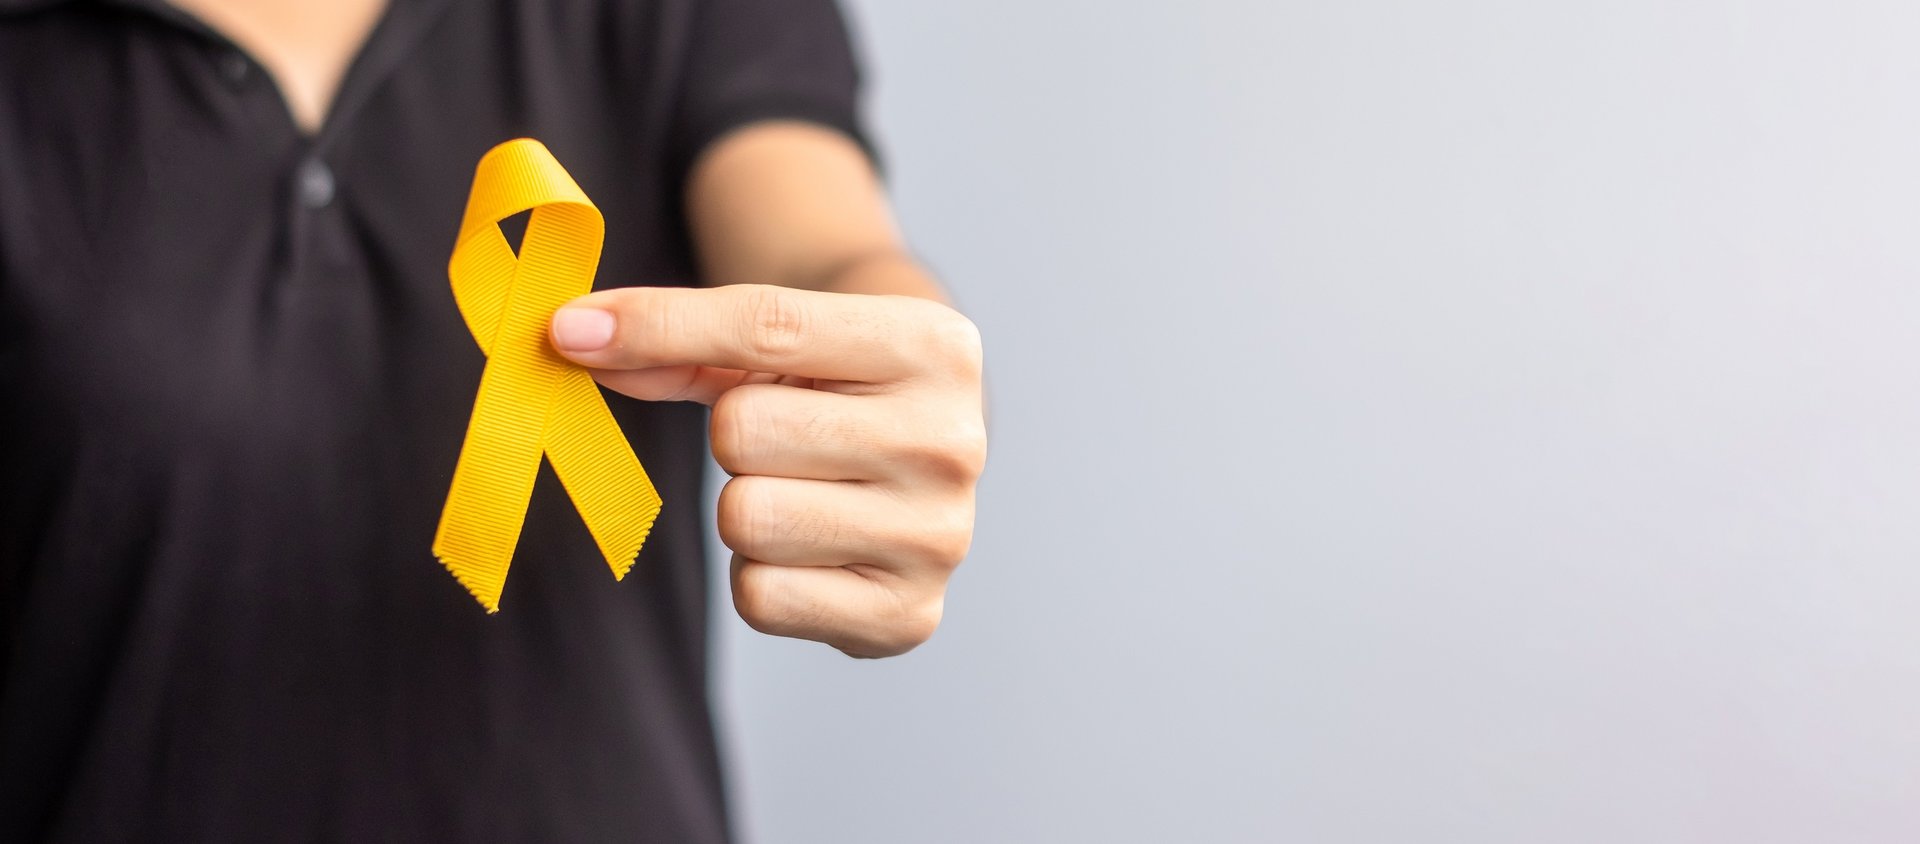 yellow-september-suicide-prevention-day-childhoo-2022-09-14-05-00-15-utc